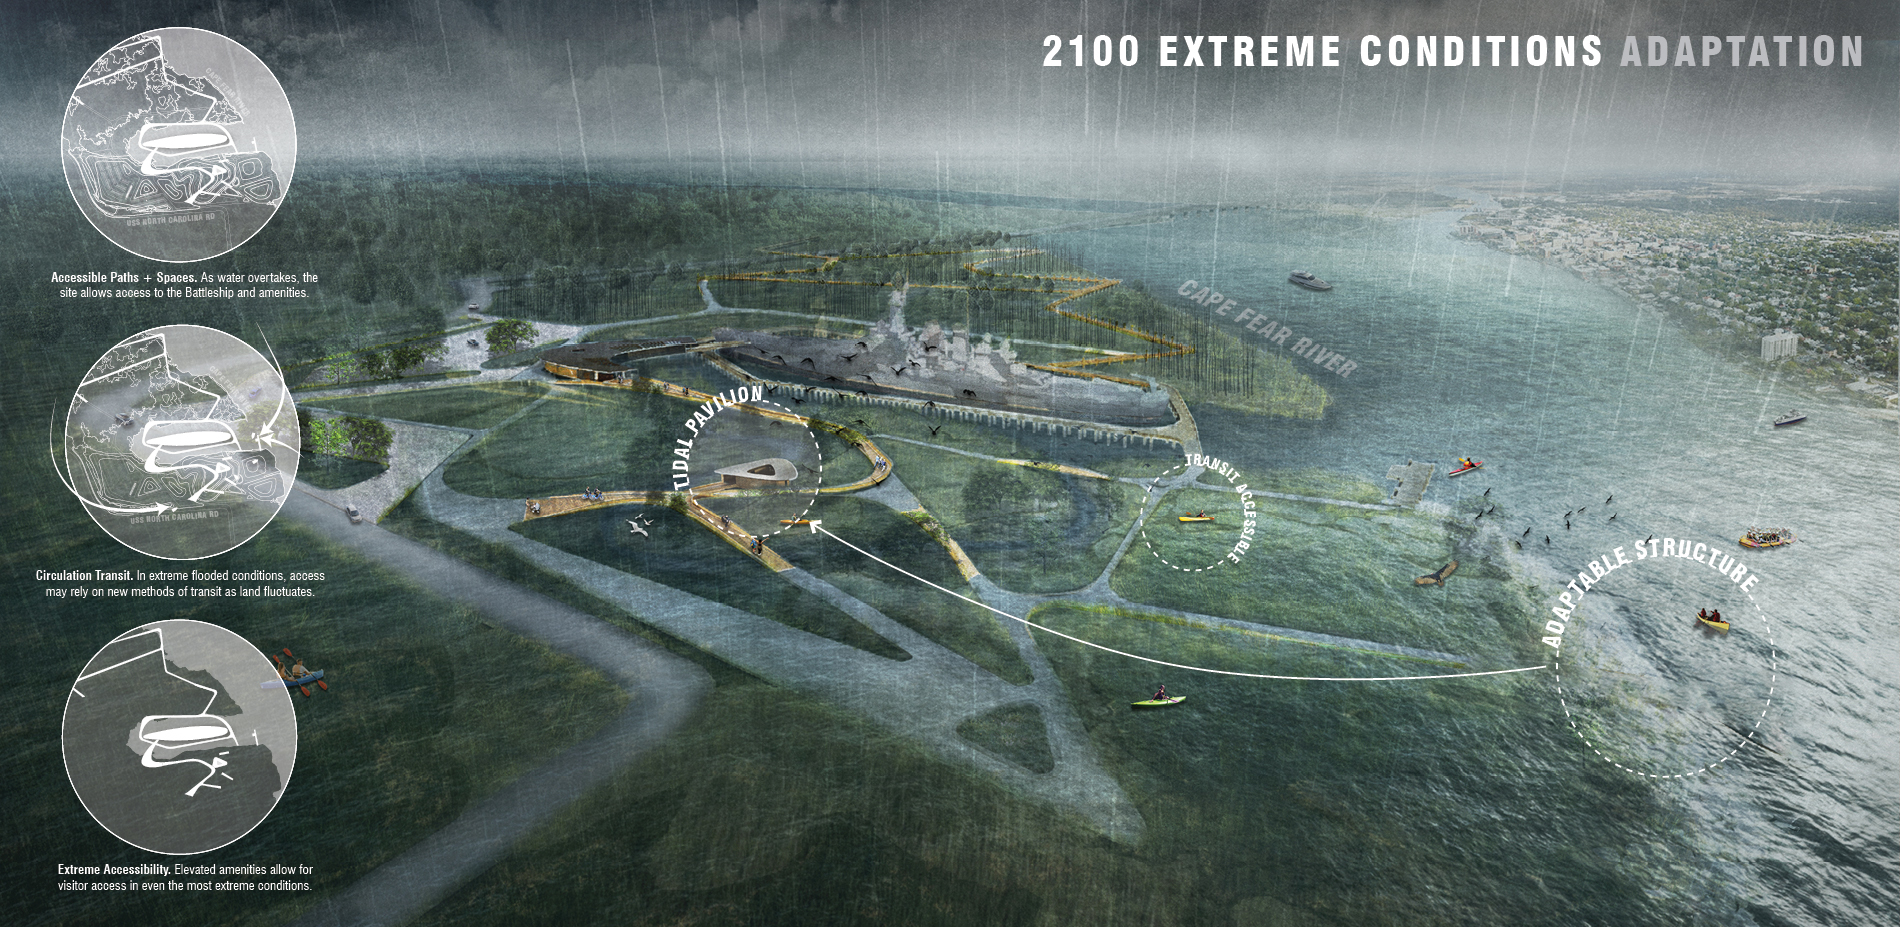 Examining Extreme Conditions: Designing an Adaptable Park for the Future